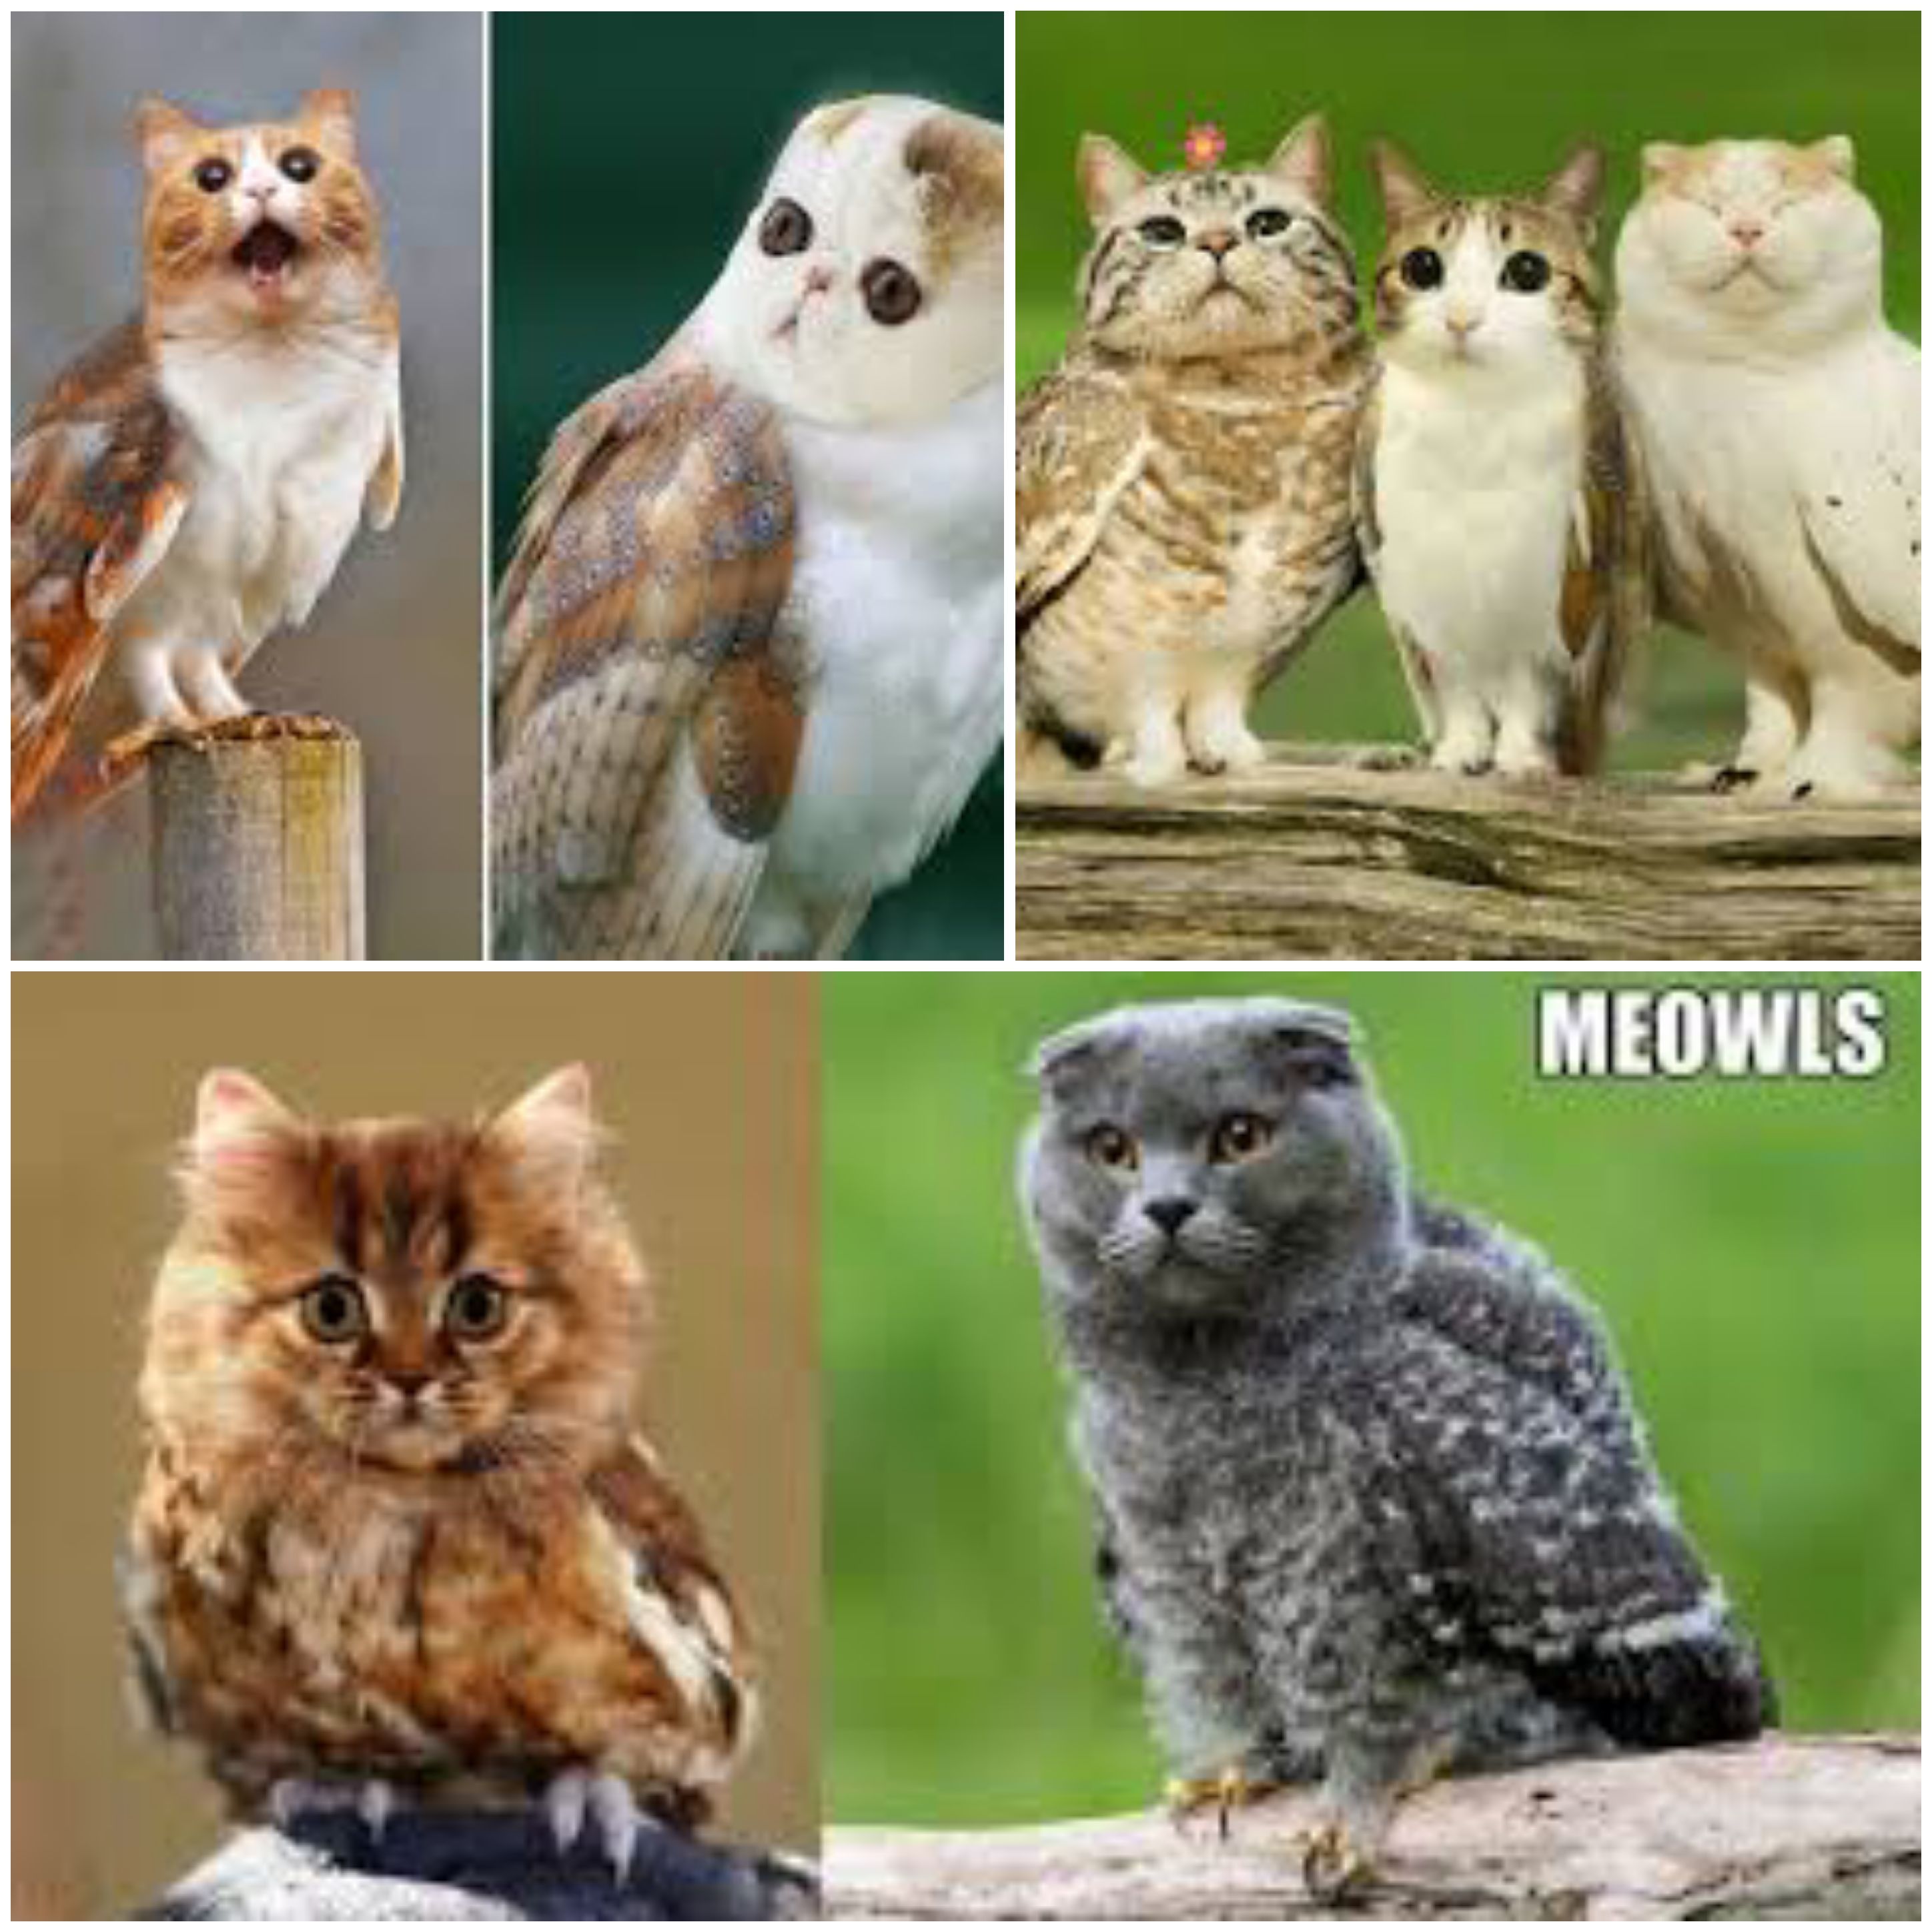 Was trying a Google search for "cat bowls" but typed "cat owls." Happiest accident ever.